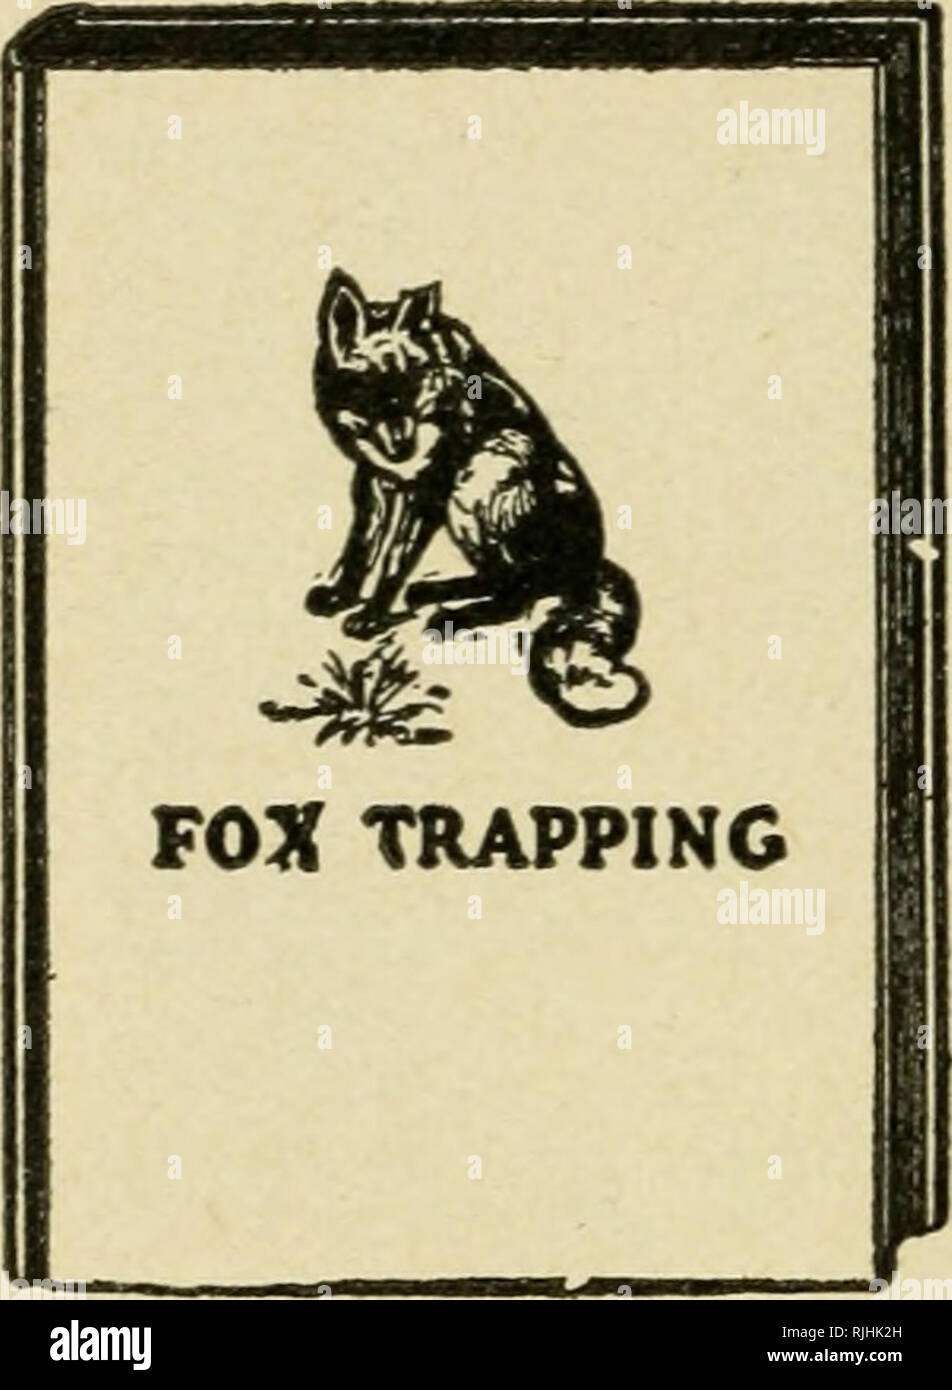 https://c8.alamy.com/comp/RJHK2H/bee-hunting-a-book-of-valuable-information-for-bee-hunters-tells-how-to-line-bees-to-trees-etc-bees-fox-trapping-a-book-of-instructions-telling-how-to-trap-snare-poison-and-shoot-a-valuable-book-for-trappers-the-author-in-his-introduction-to-this-book-says-if-all-the-methods-as-explained-in-this-book-had-been-studied-out-by-one-man-and-he-began-trapping-when-columbus-discovered-america-he-would-be-far-from-com-pleted-the-methods-given-in-this-book-are-largely-from-old-and-experienced-trappers-who-have-given-their-own-suc-cessful-methods-enabling-the-trapper-of-little-experienc-RJHK2H.jpg